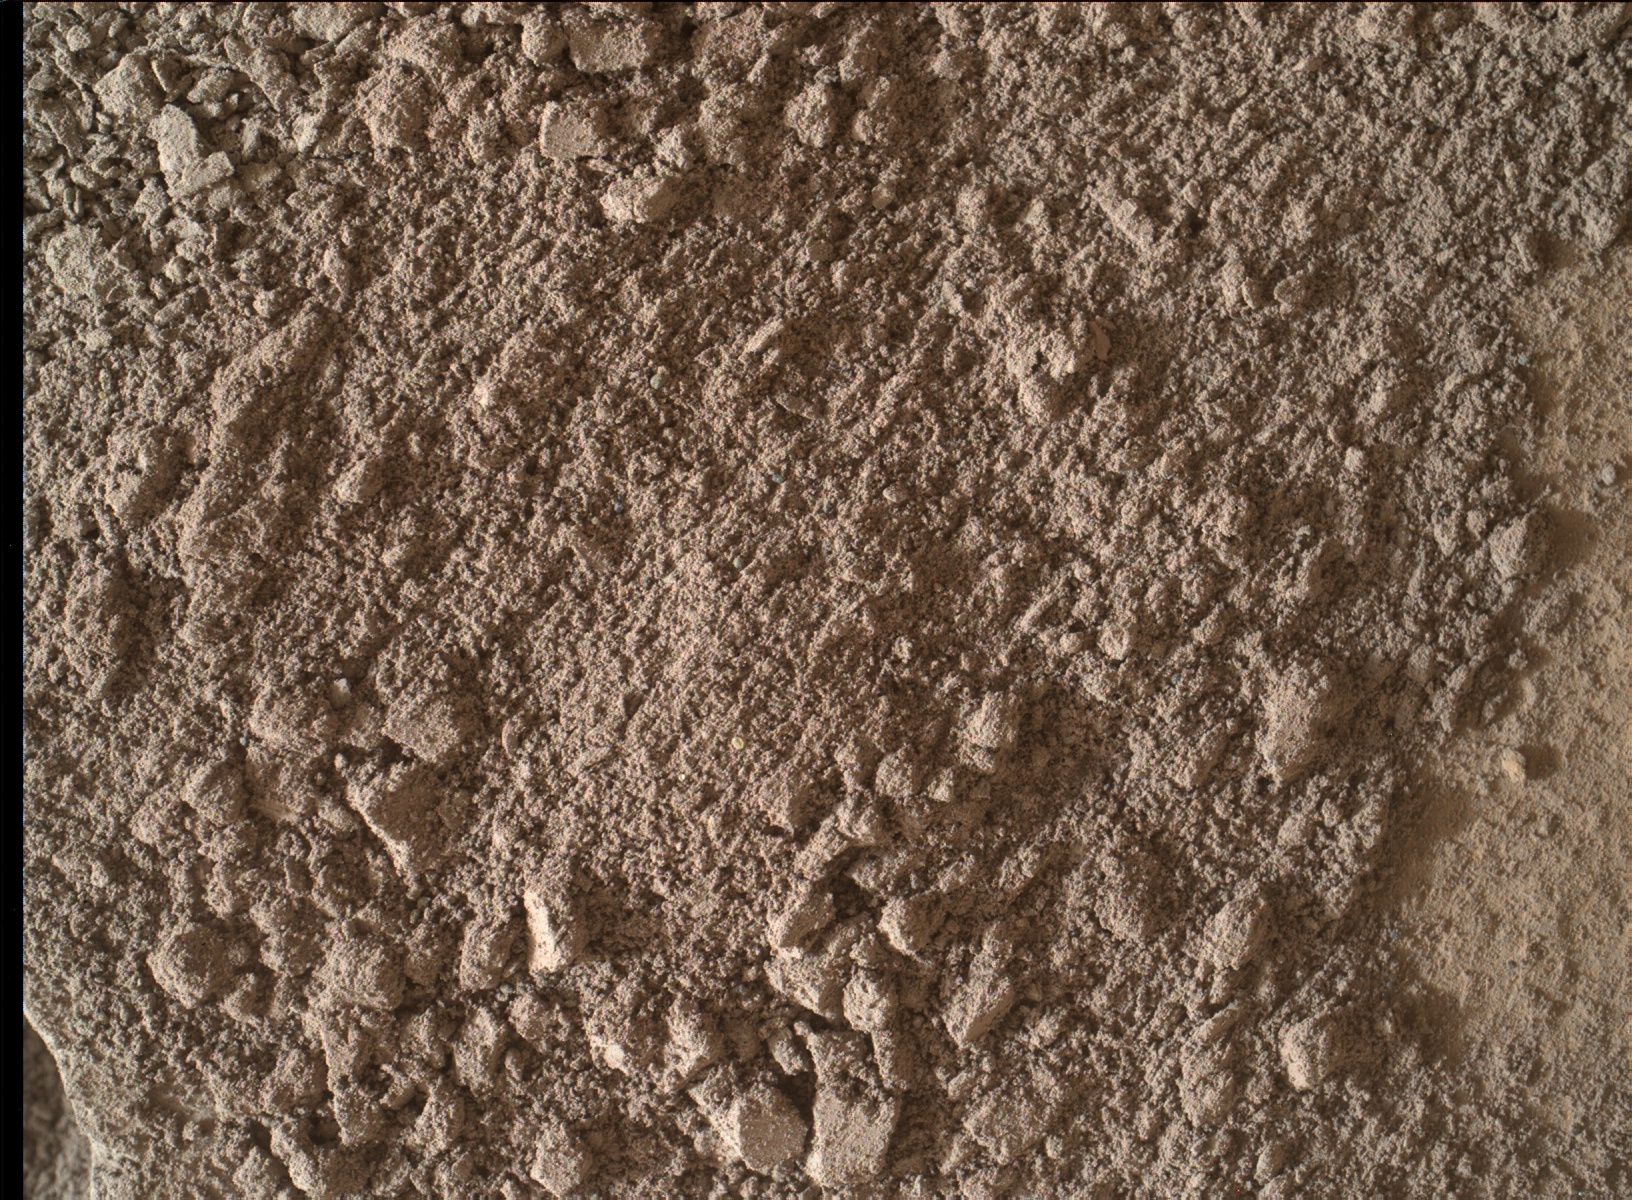 Nasa's Mars rover Curiosity acquired this image using its Mars Hand Lens Imager (MAHLI) on Sol 765